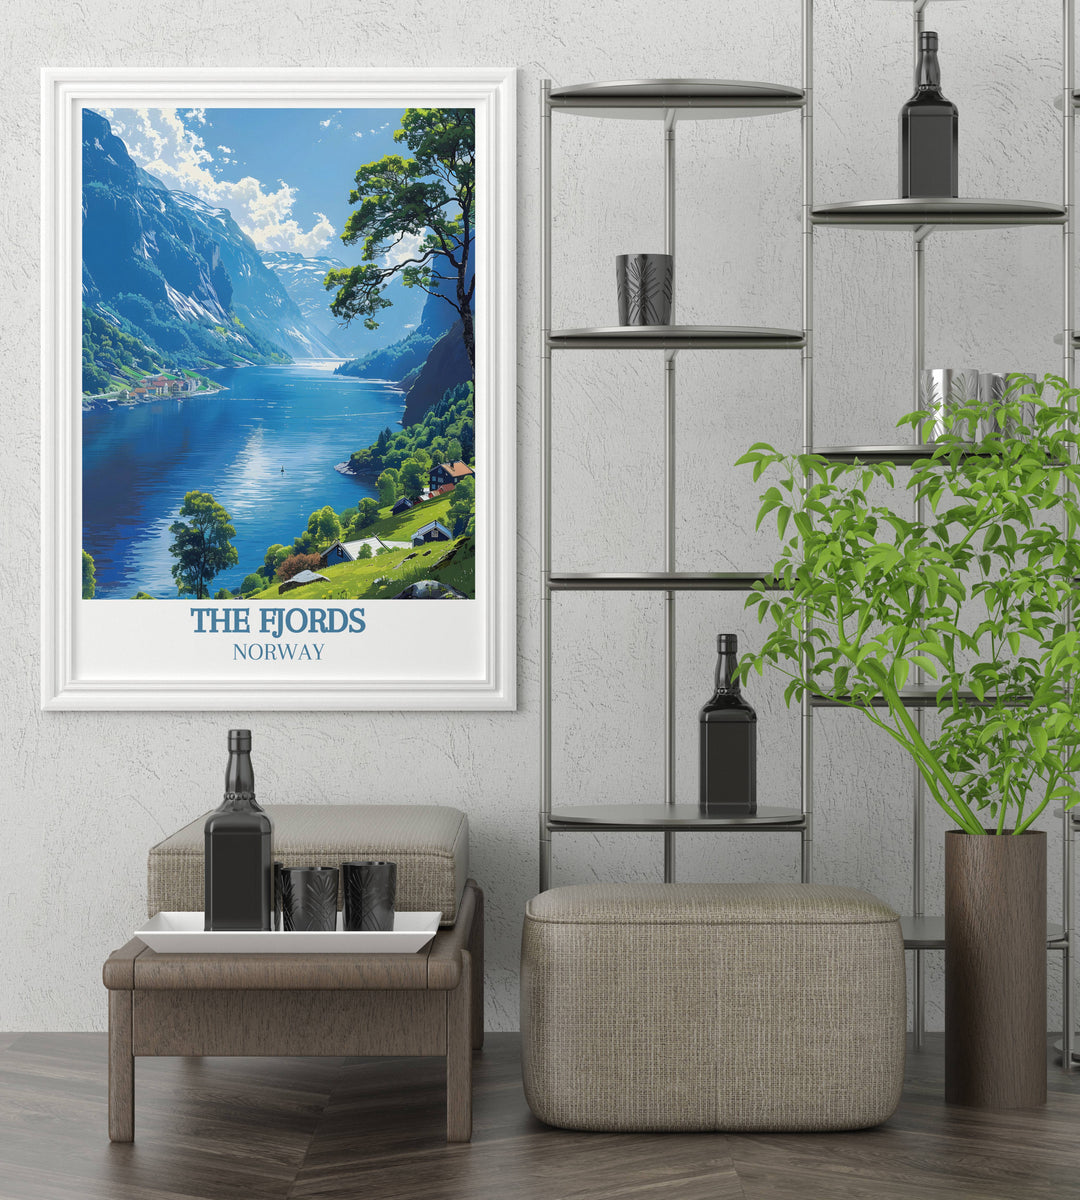 The Fjords gallery wall art pieces highlighting the unique beauty of Norways fjords, showcasing the dramatic cliffs, deep blue waters, and lush greenery, perfect for nature enthusiasts.